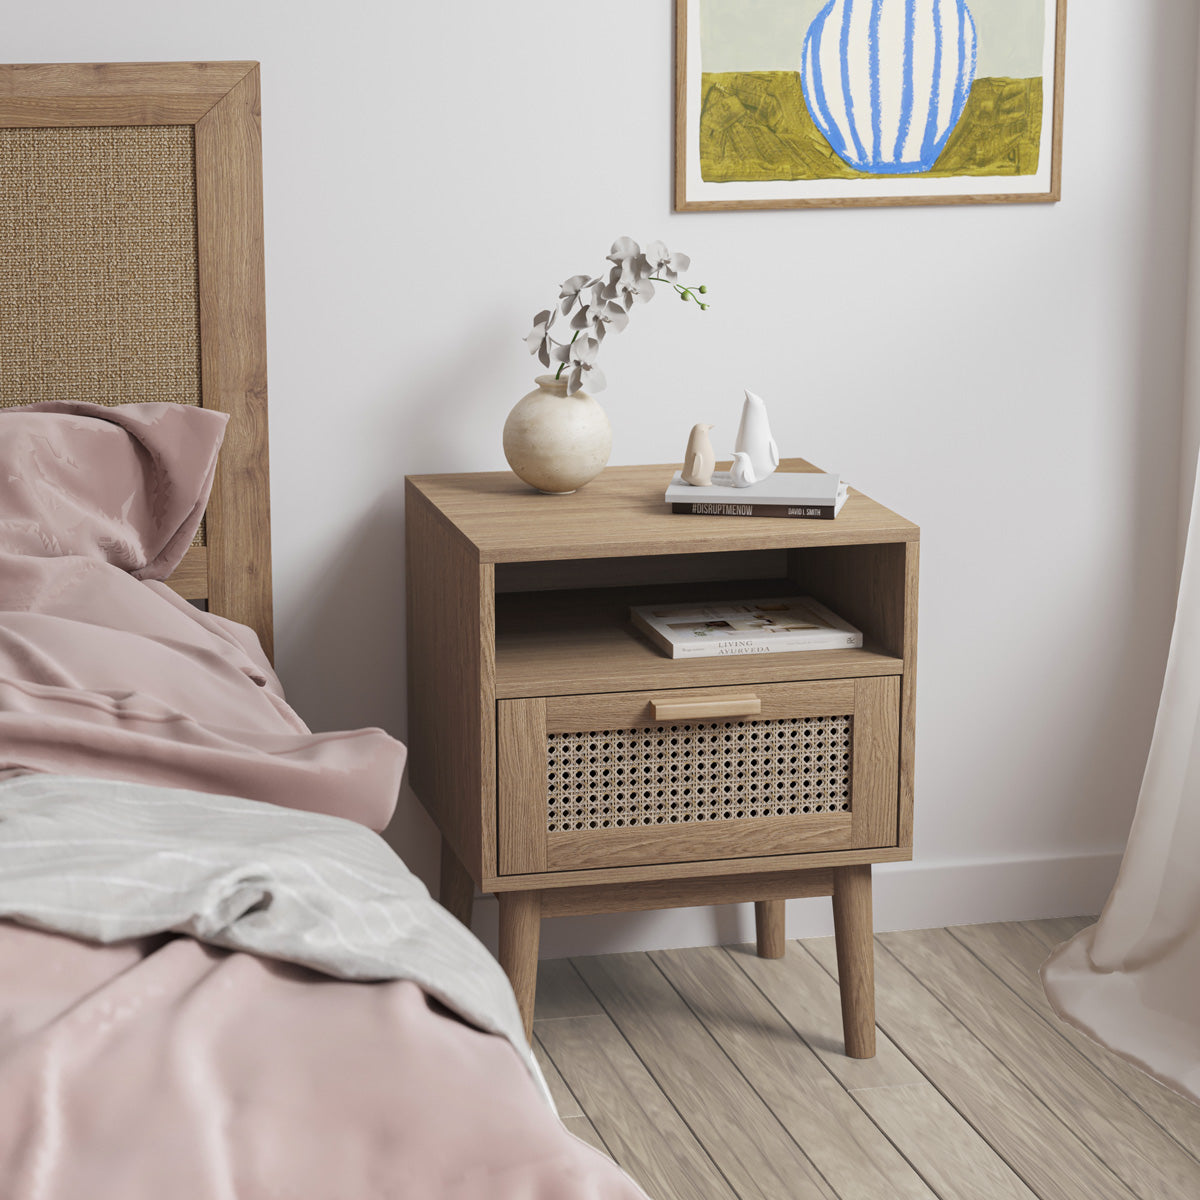 Rattan Bedside Table with Storage Drawer (Finn)